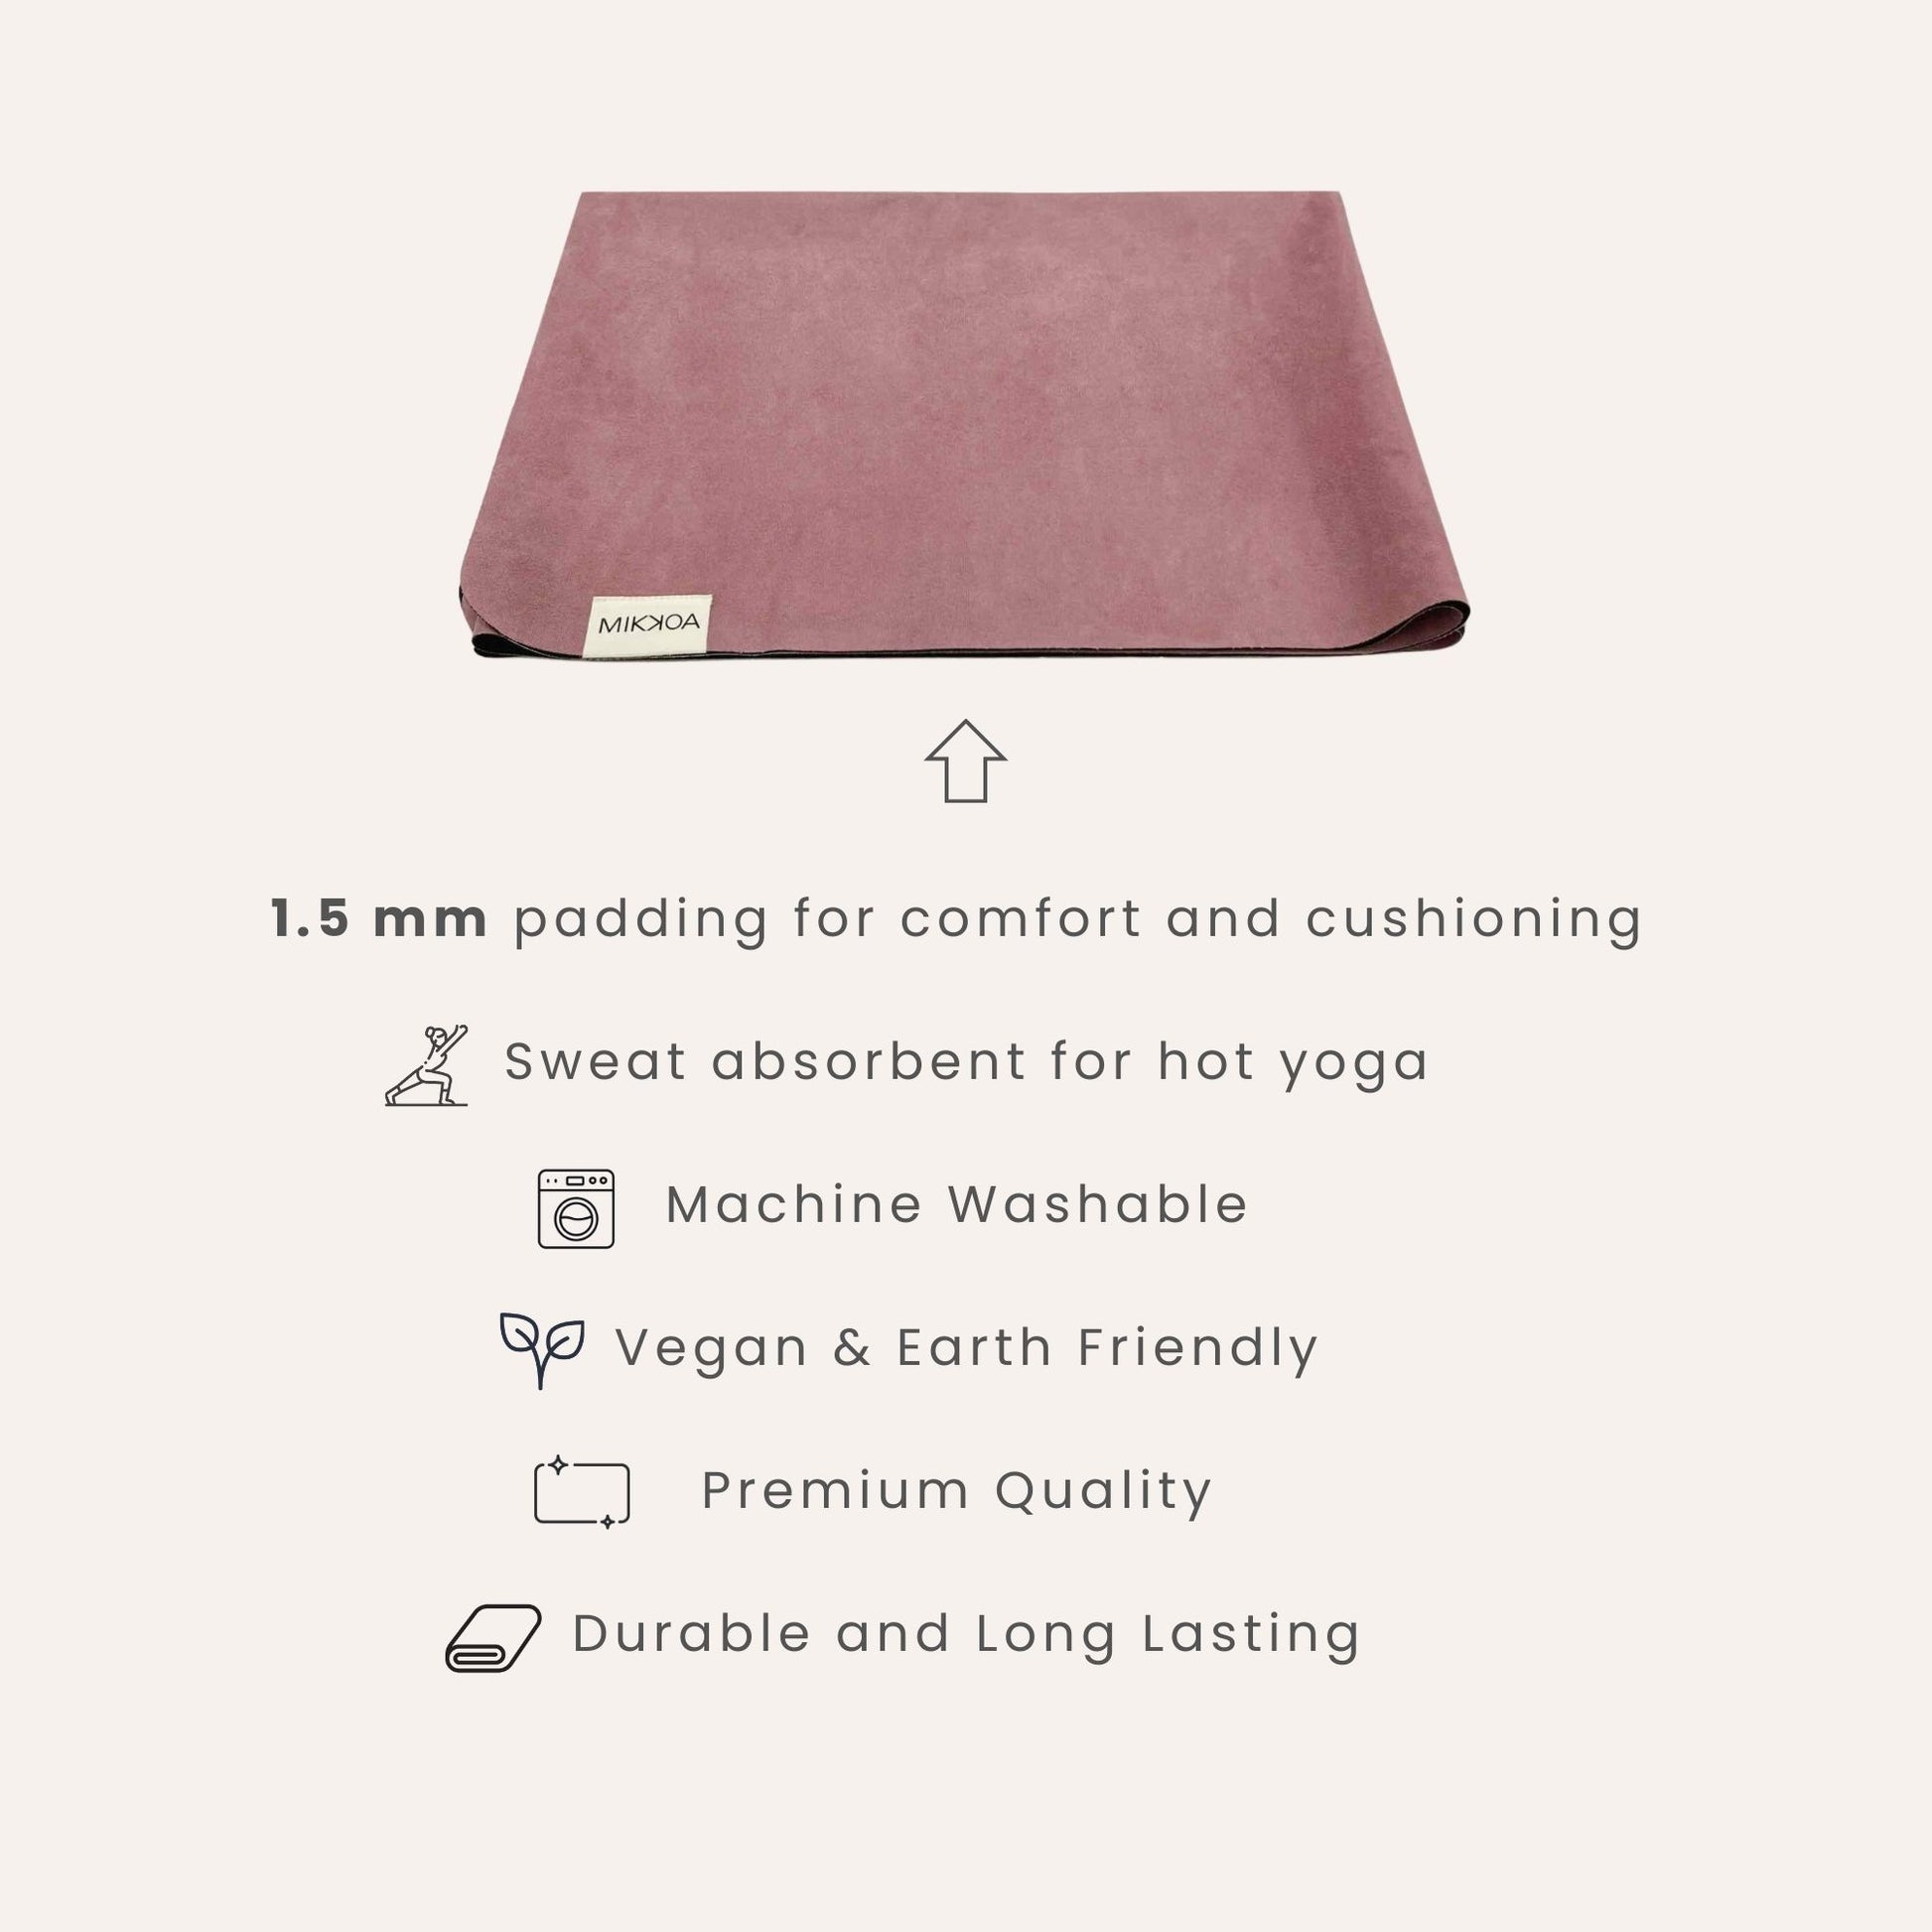 Exercise Mat For Travel-Pink Exercise Mat For Travel-Mikkoa Exercise Mat For Travel